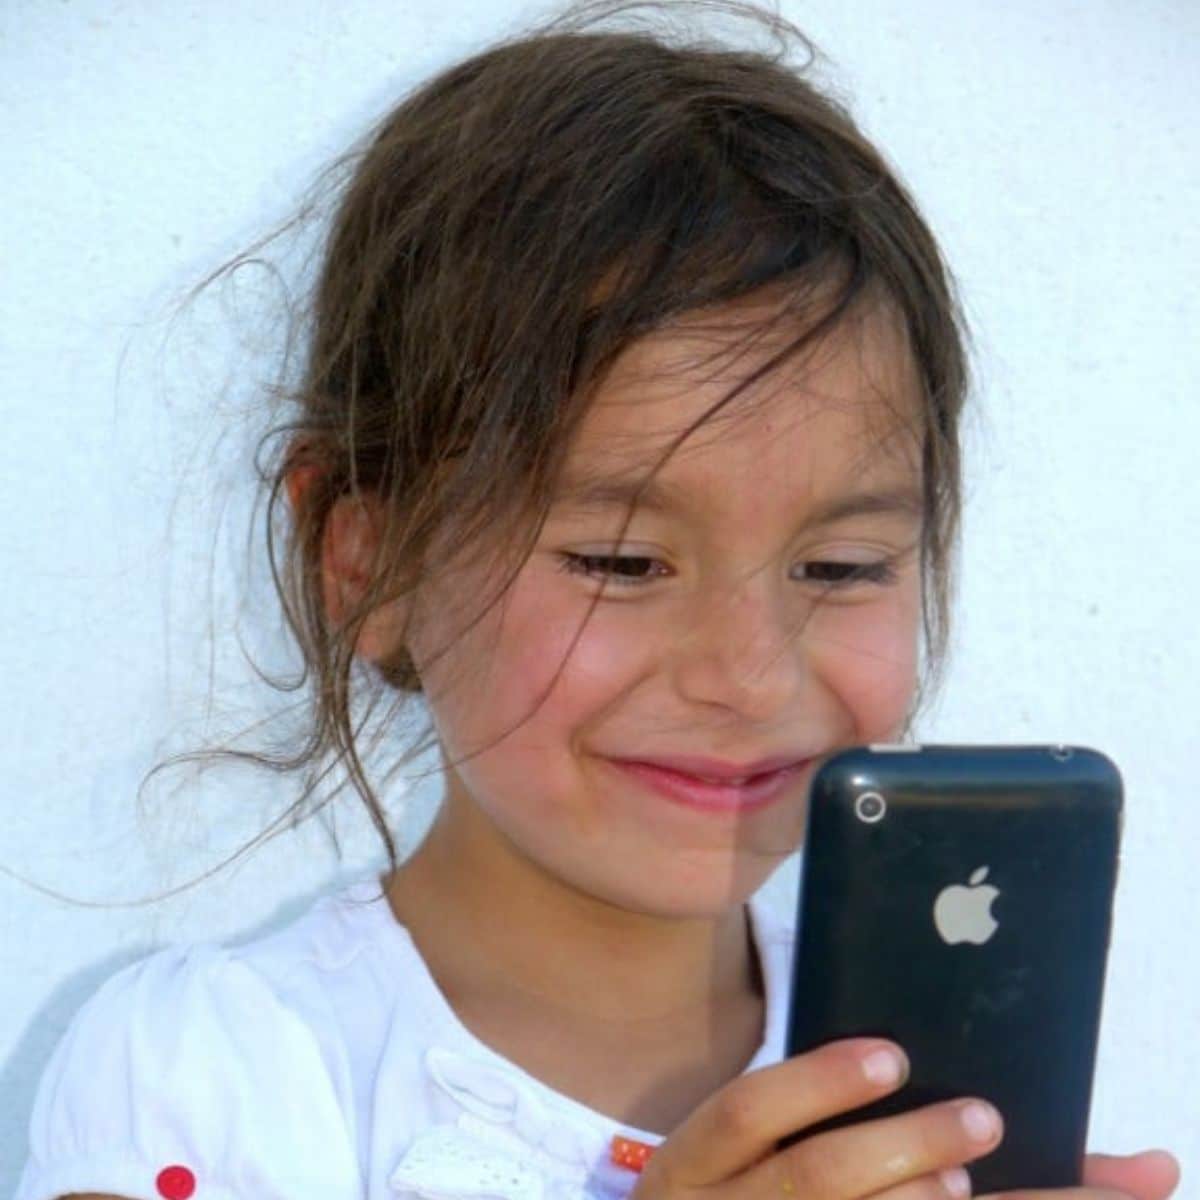 Young girl holding an Iphone